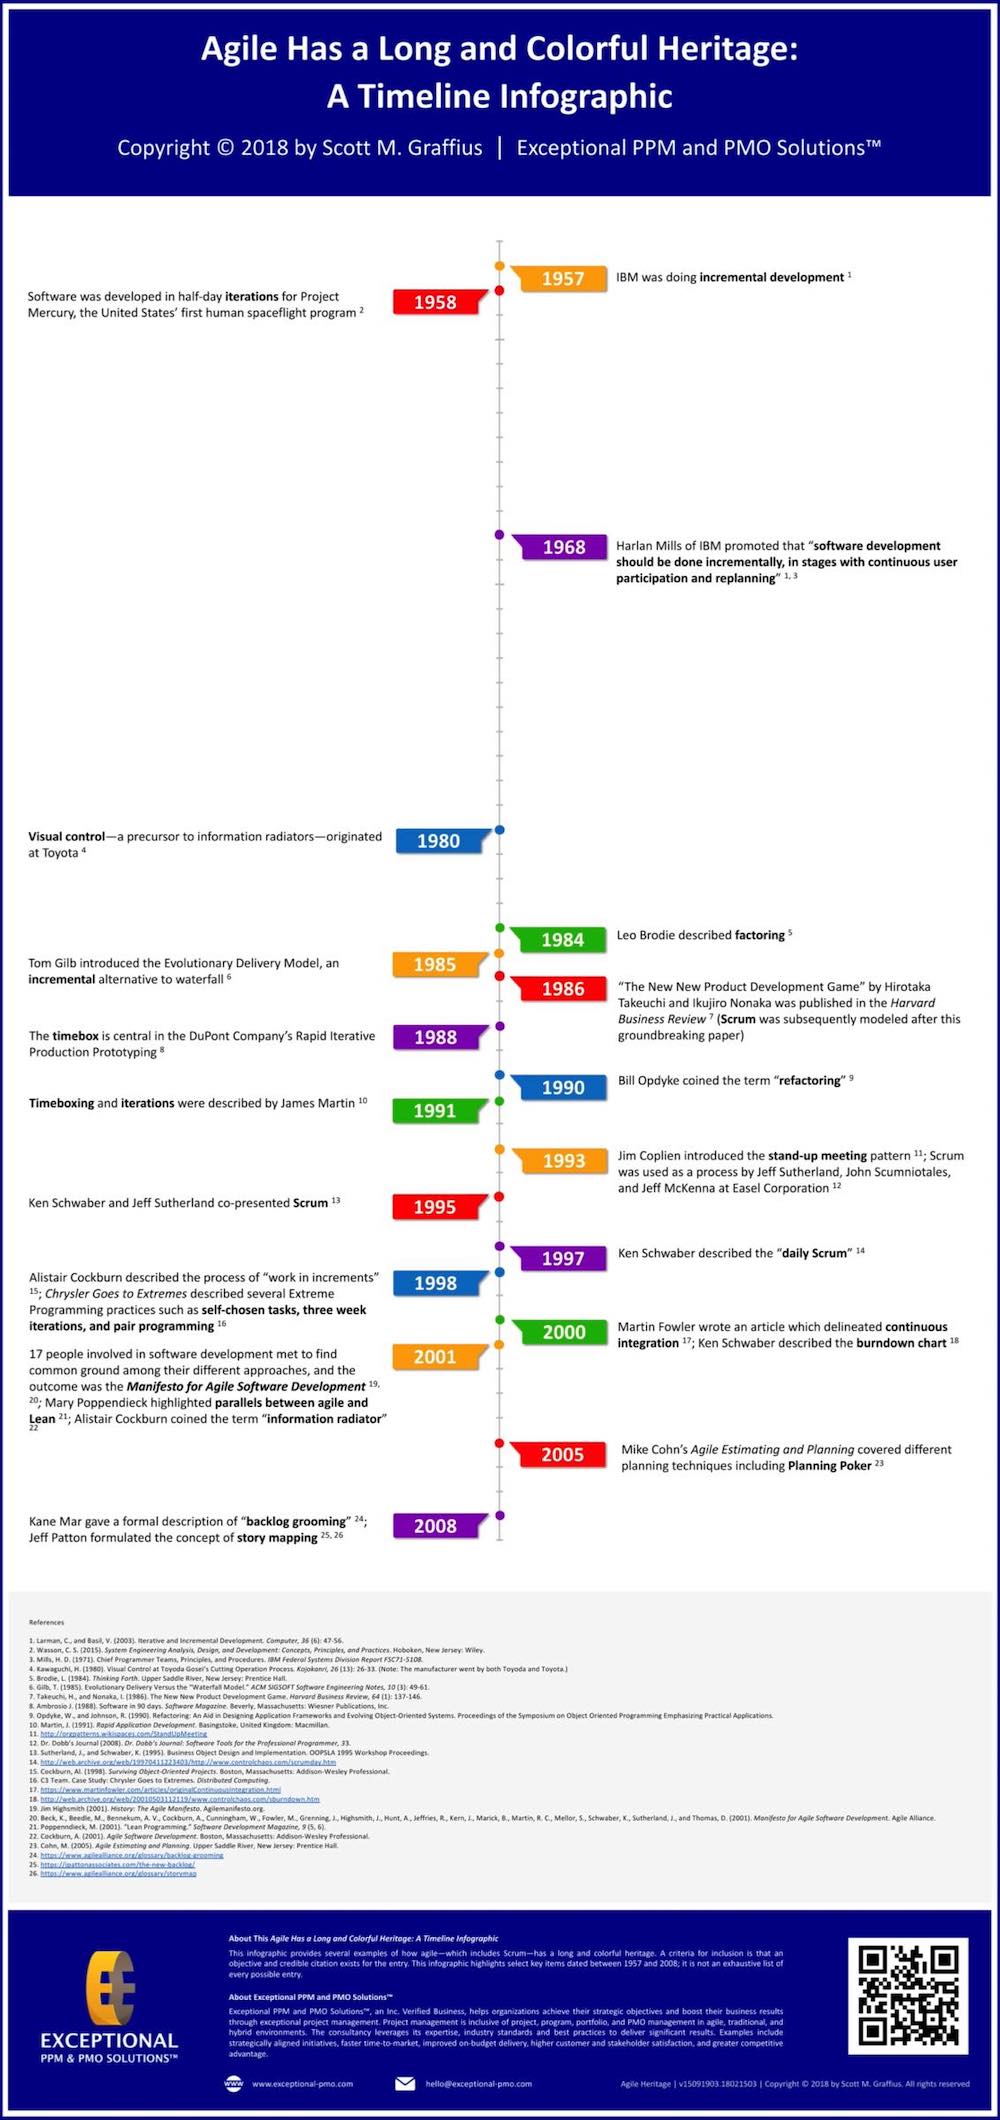 Scott-M-Graffius-Exceptional-PPM-and-PMO-Solutions-Infographic-Agile-History-LR-SQ